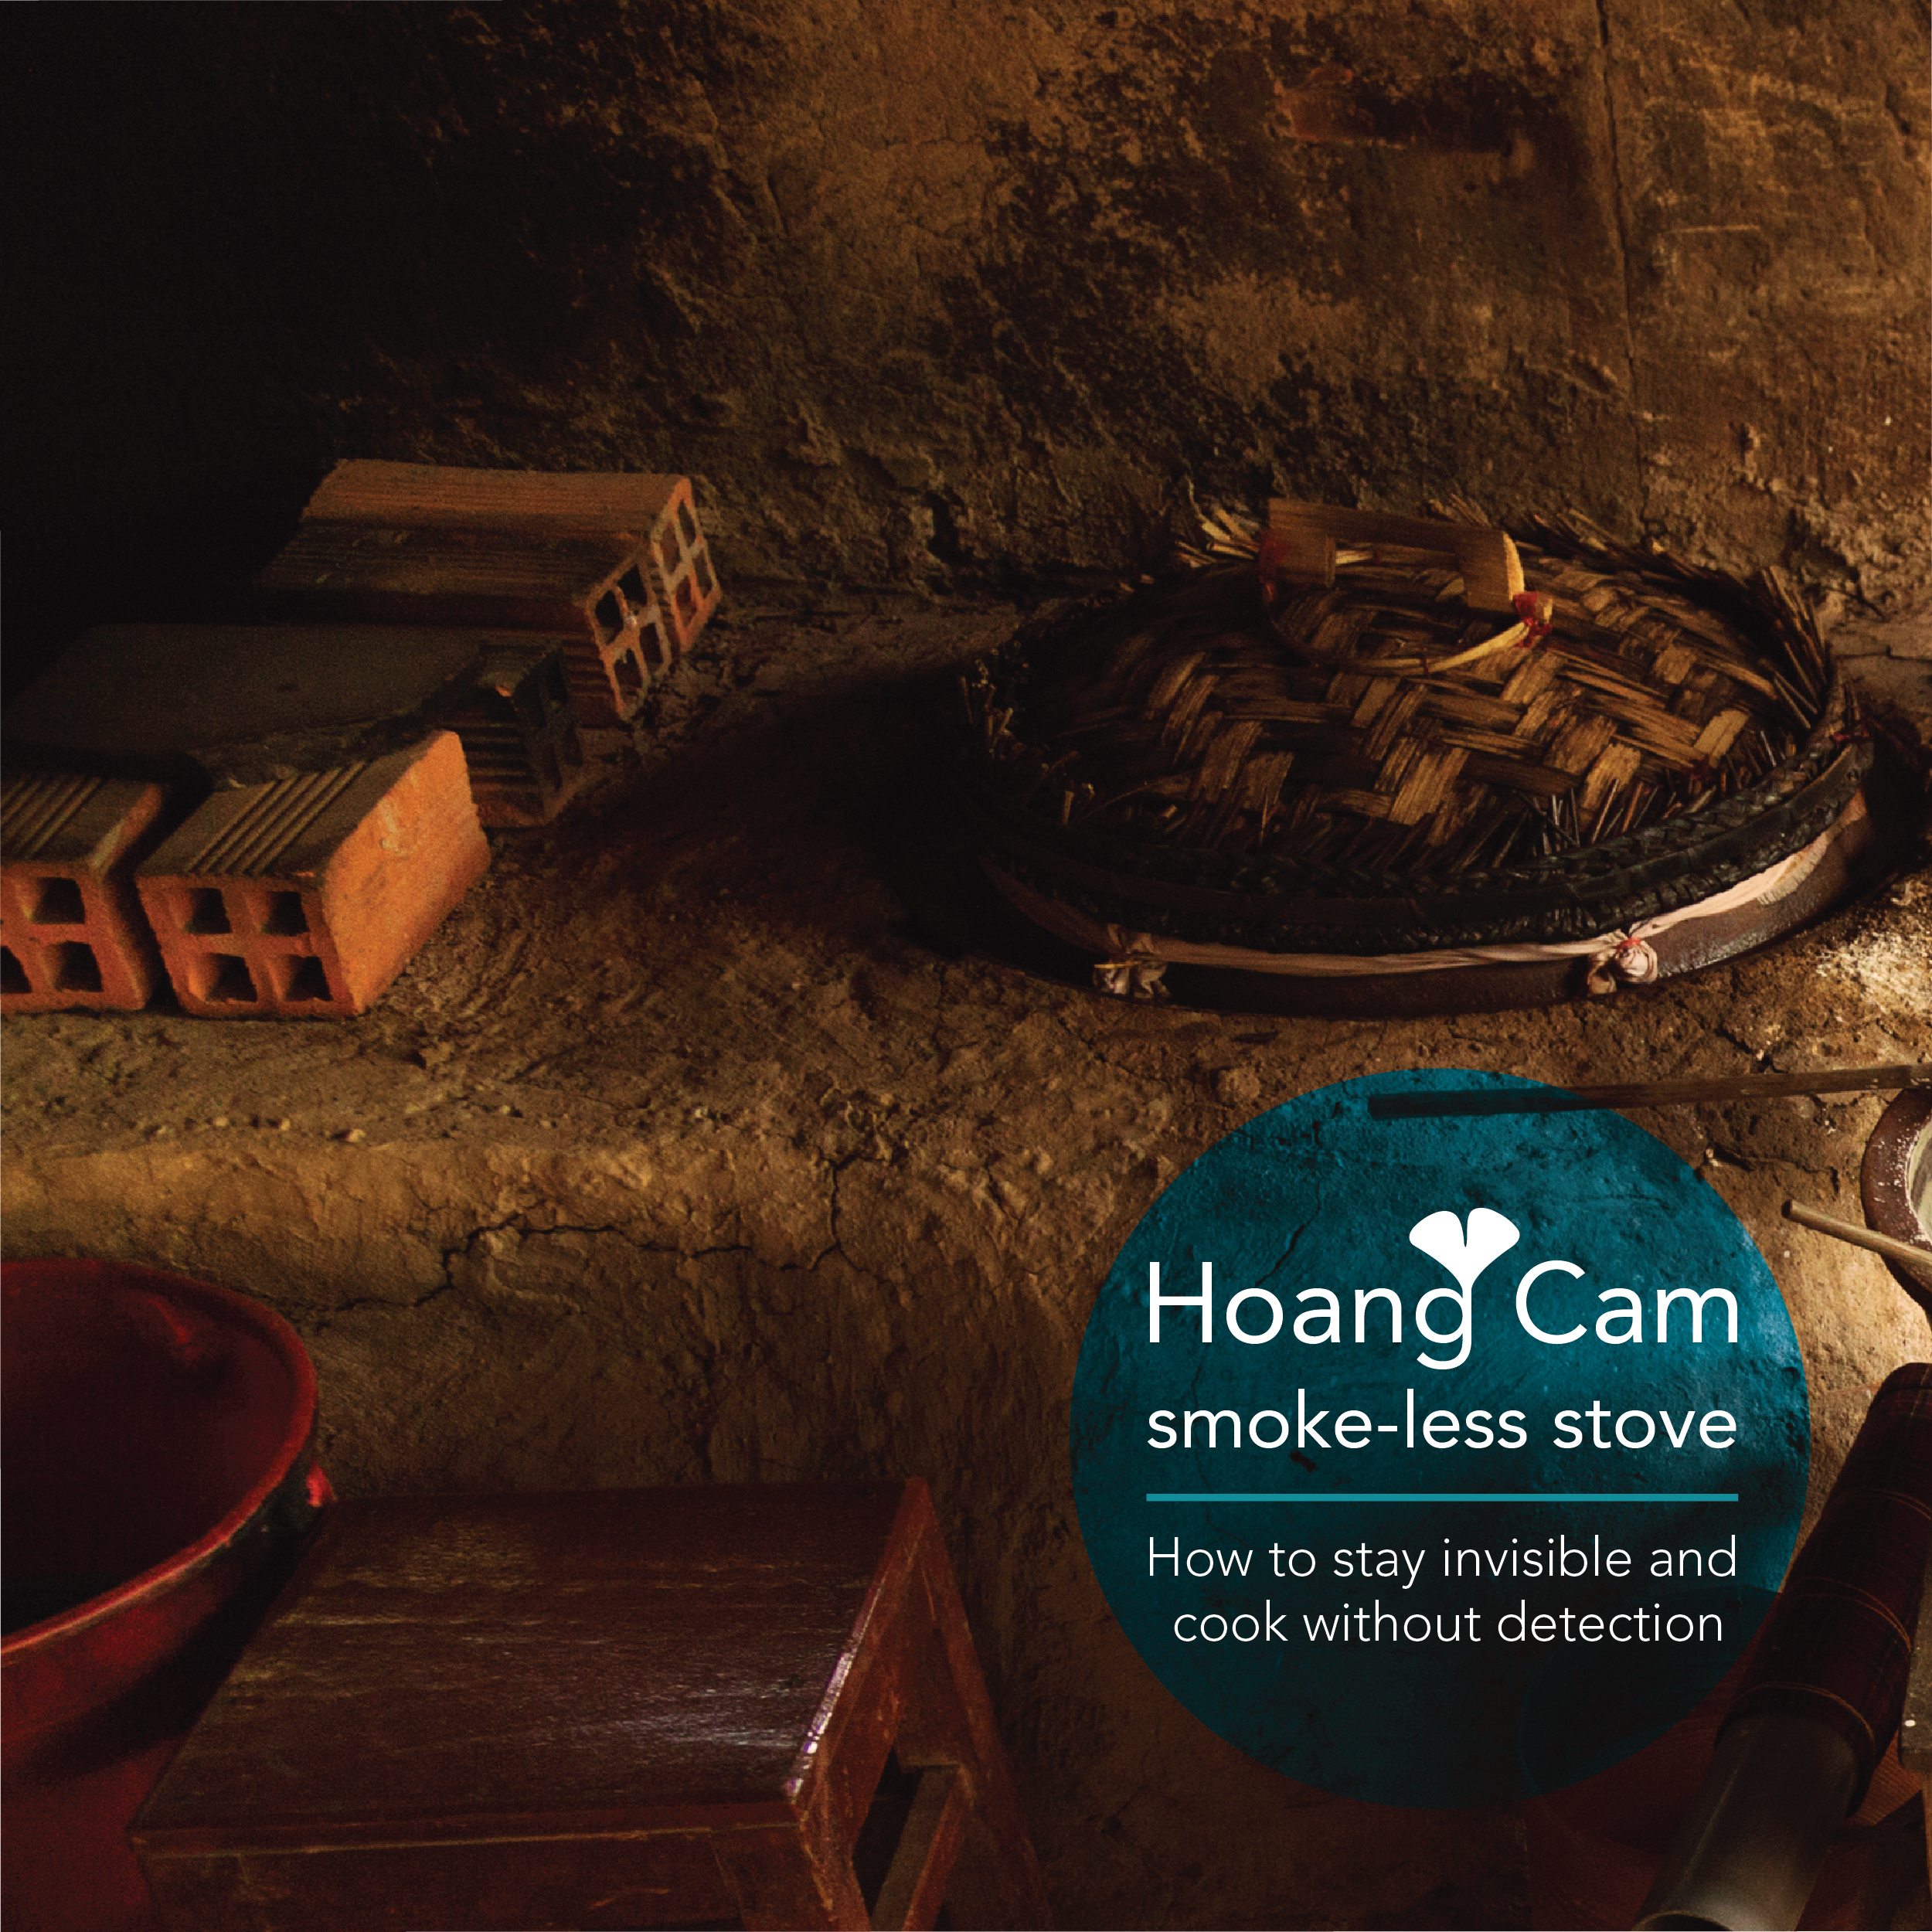 2 - Hoang Cam smoke-less stove Hoang Cam stove cooks meal without ...